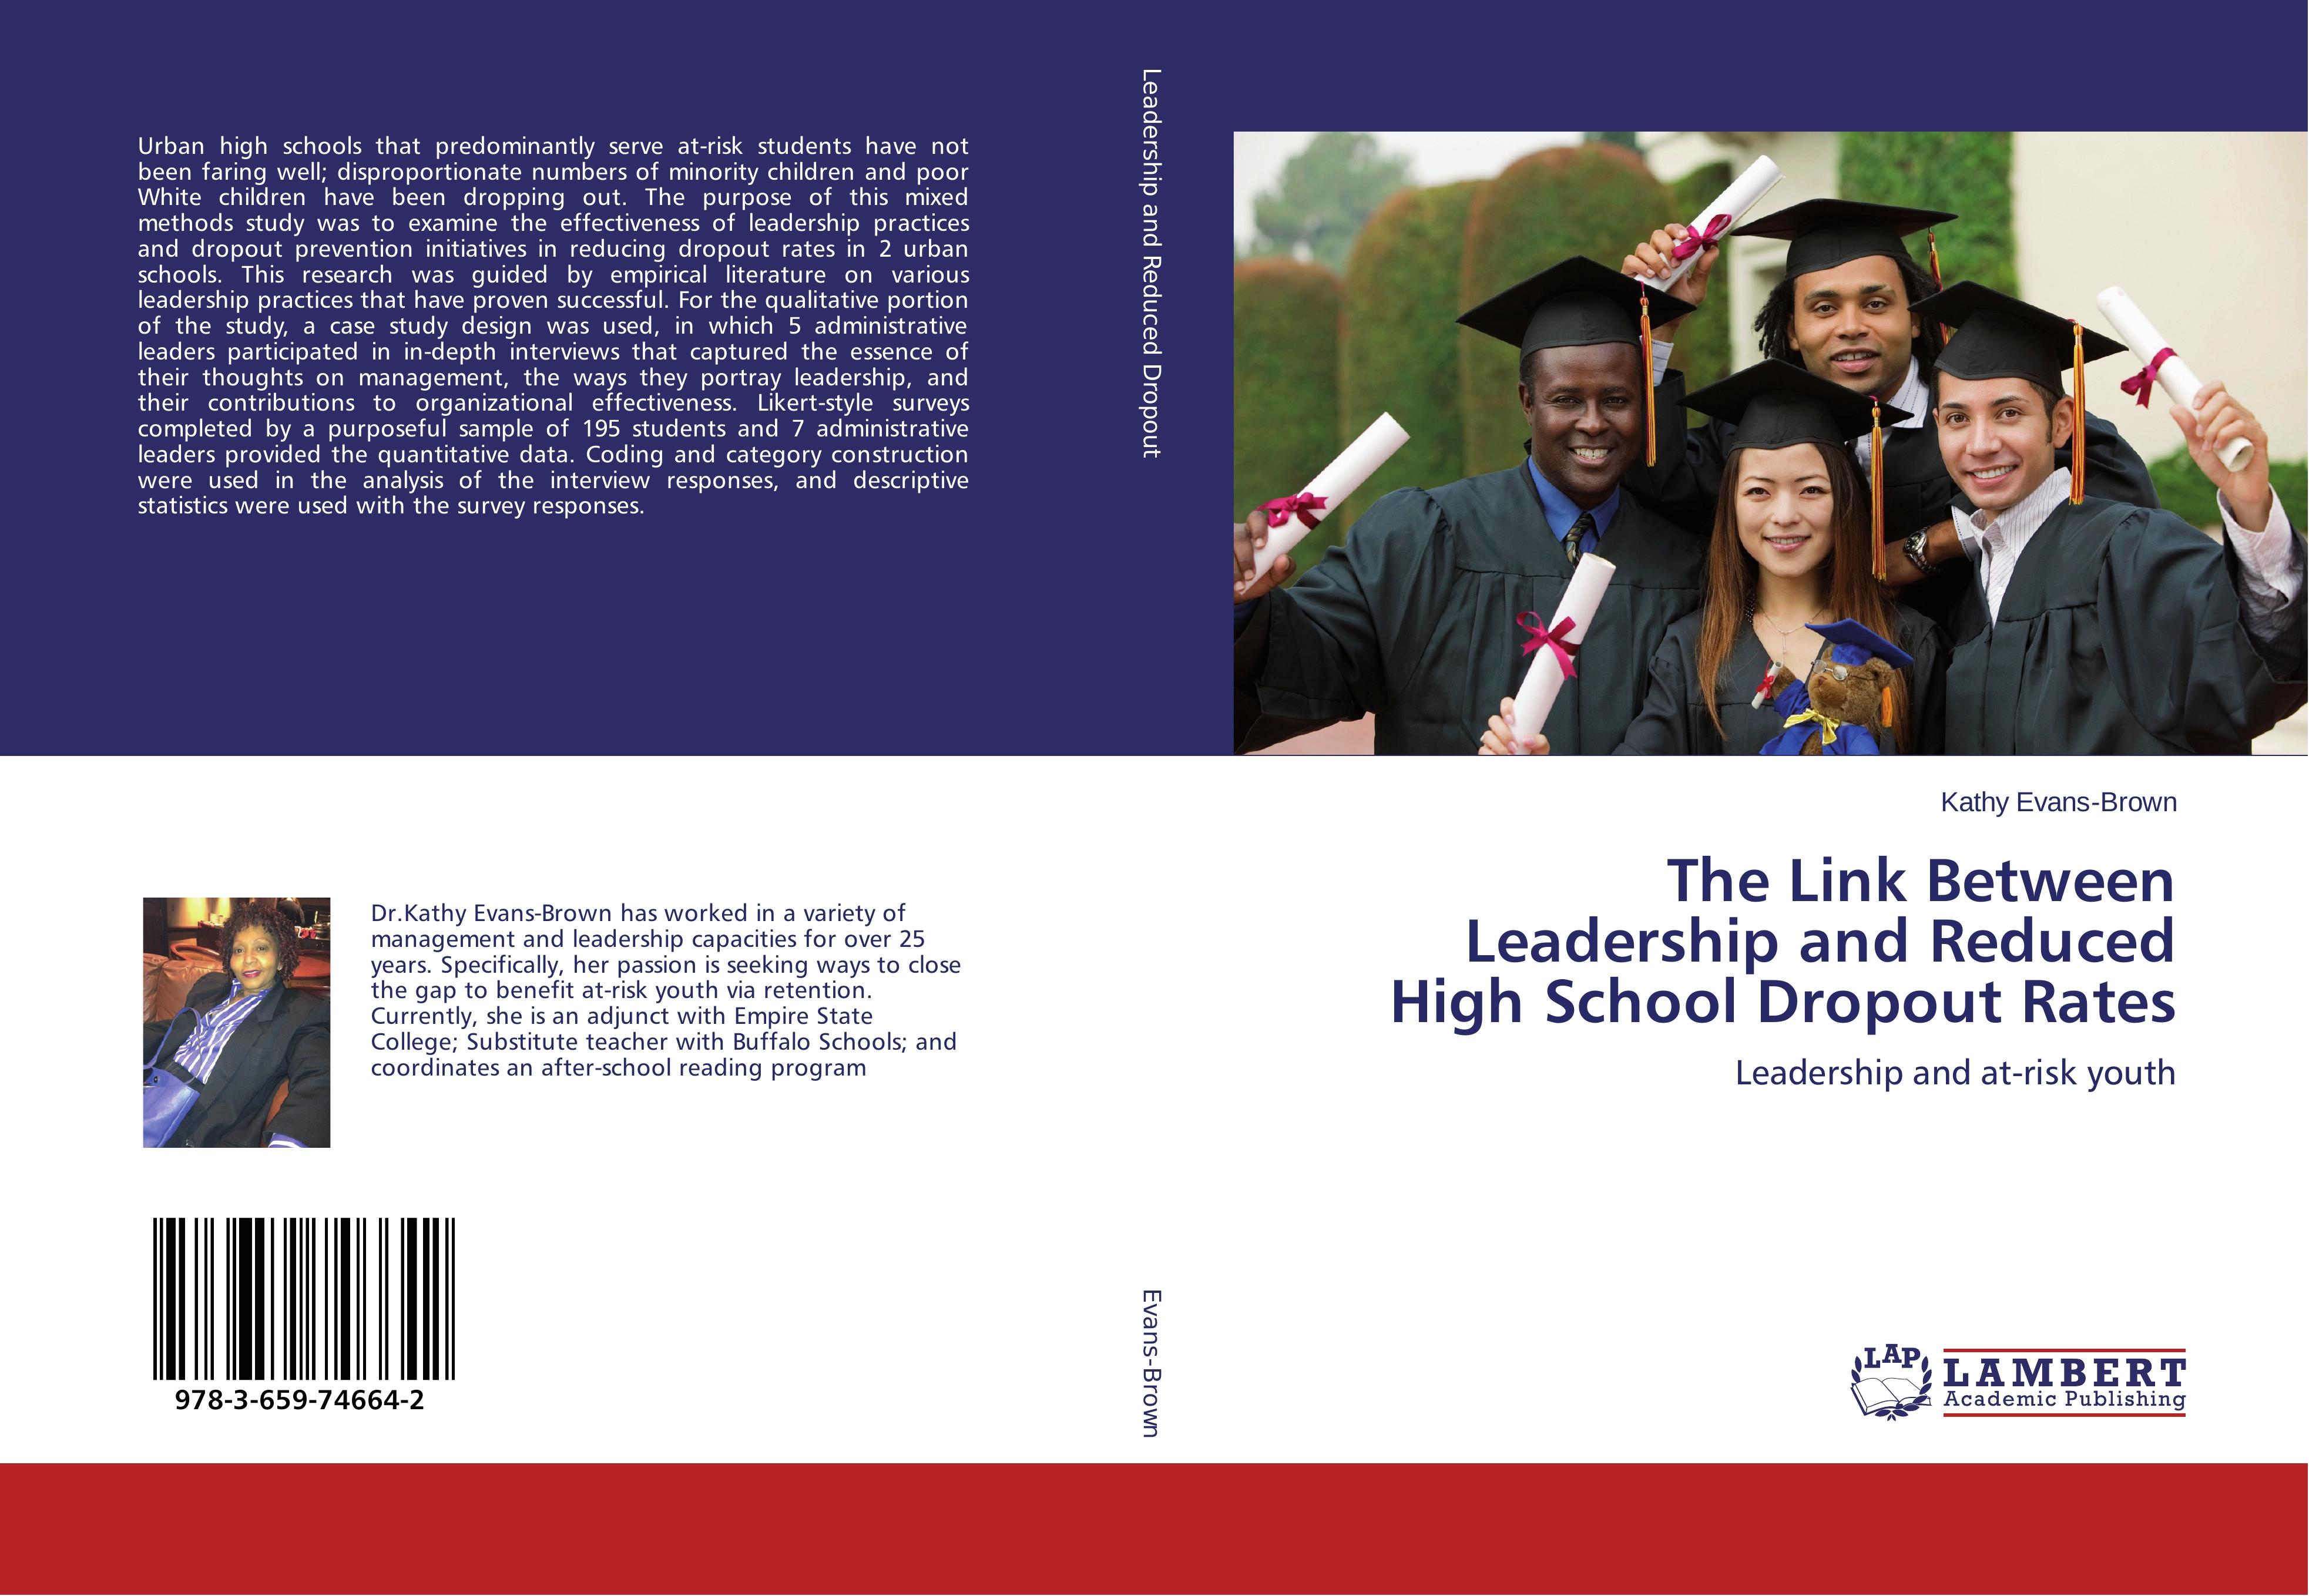 The Link Between Leadership and Reduced High School Dropout Rates - Evans-Brown, Kathy